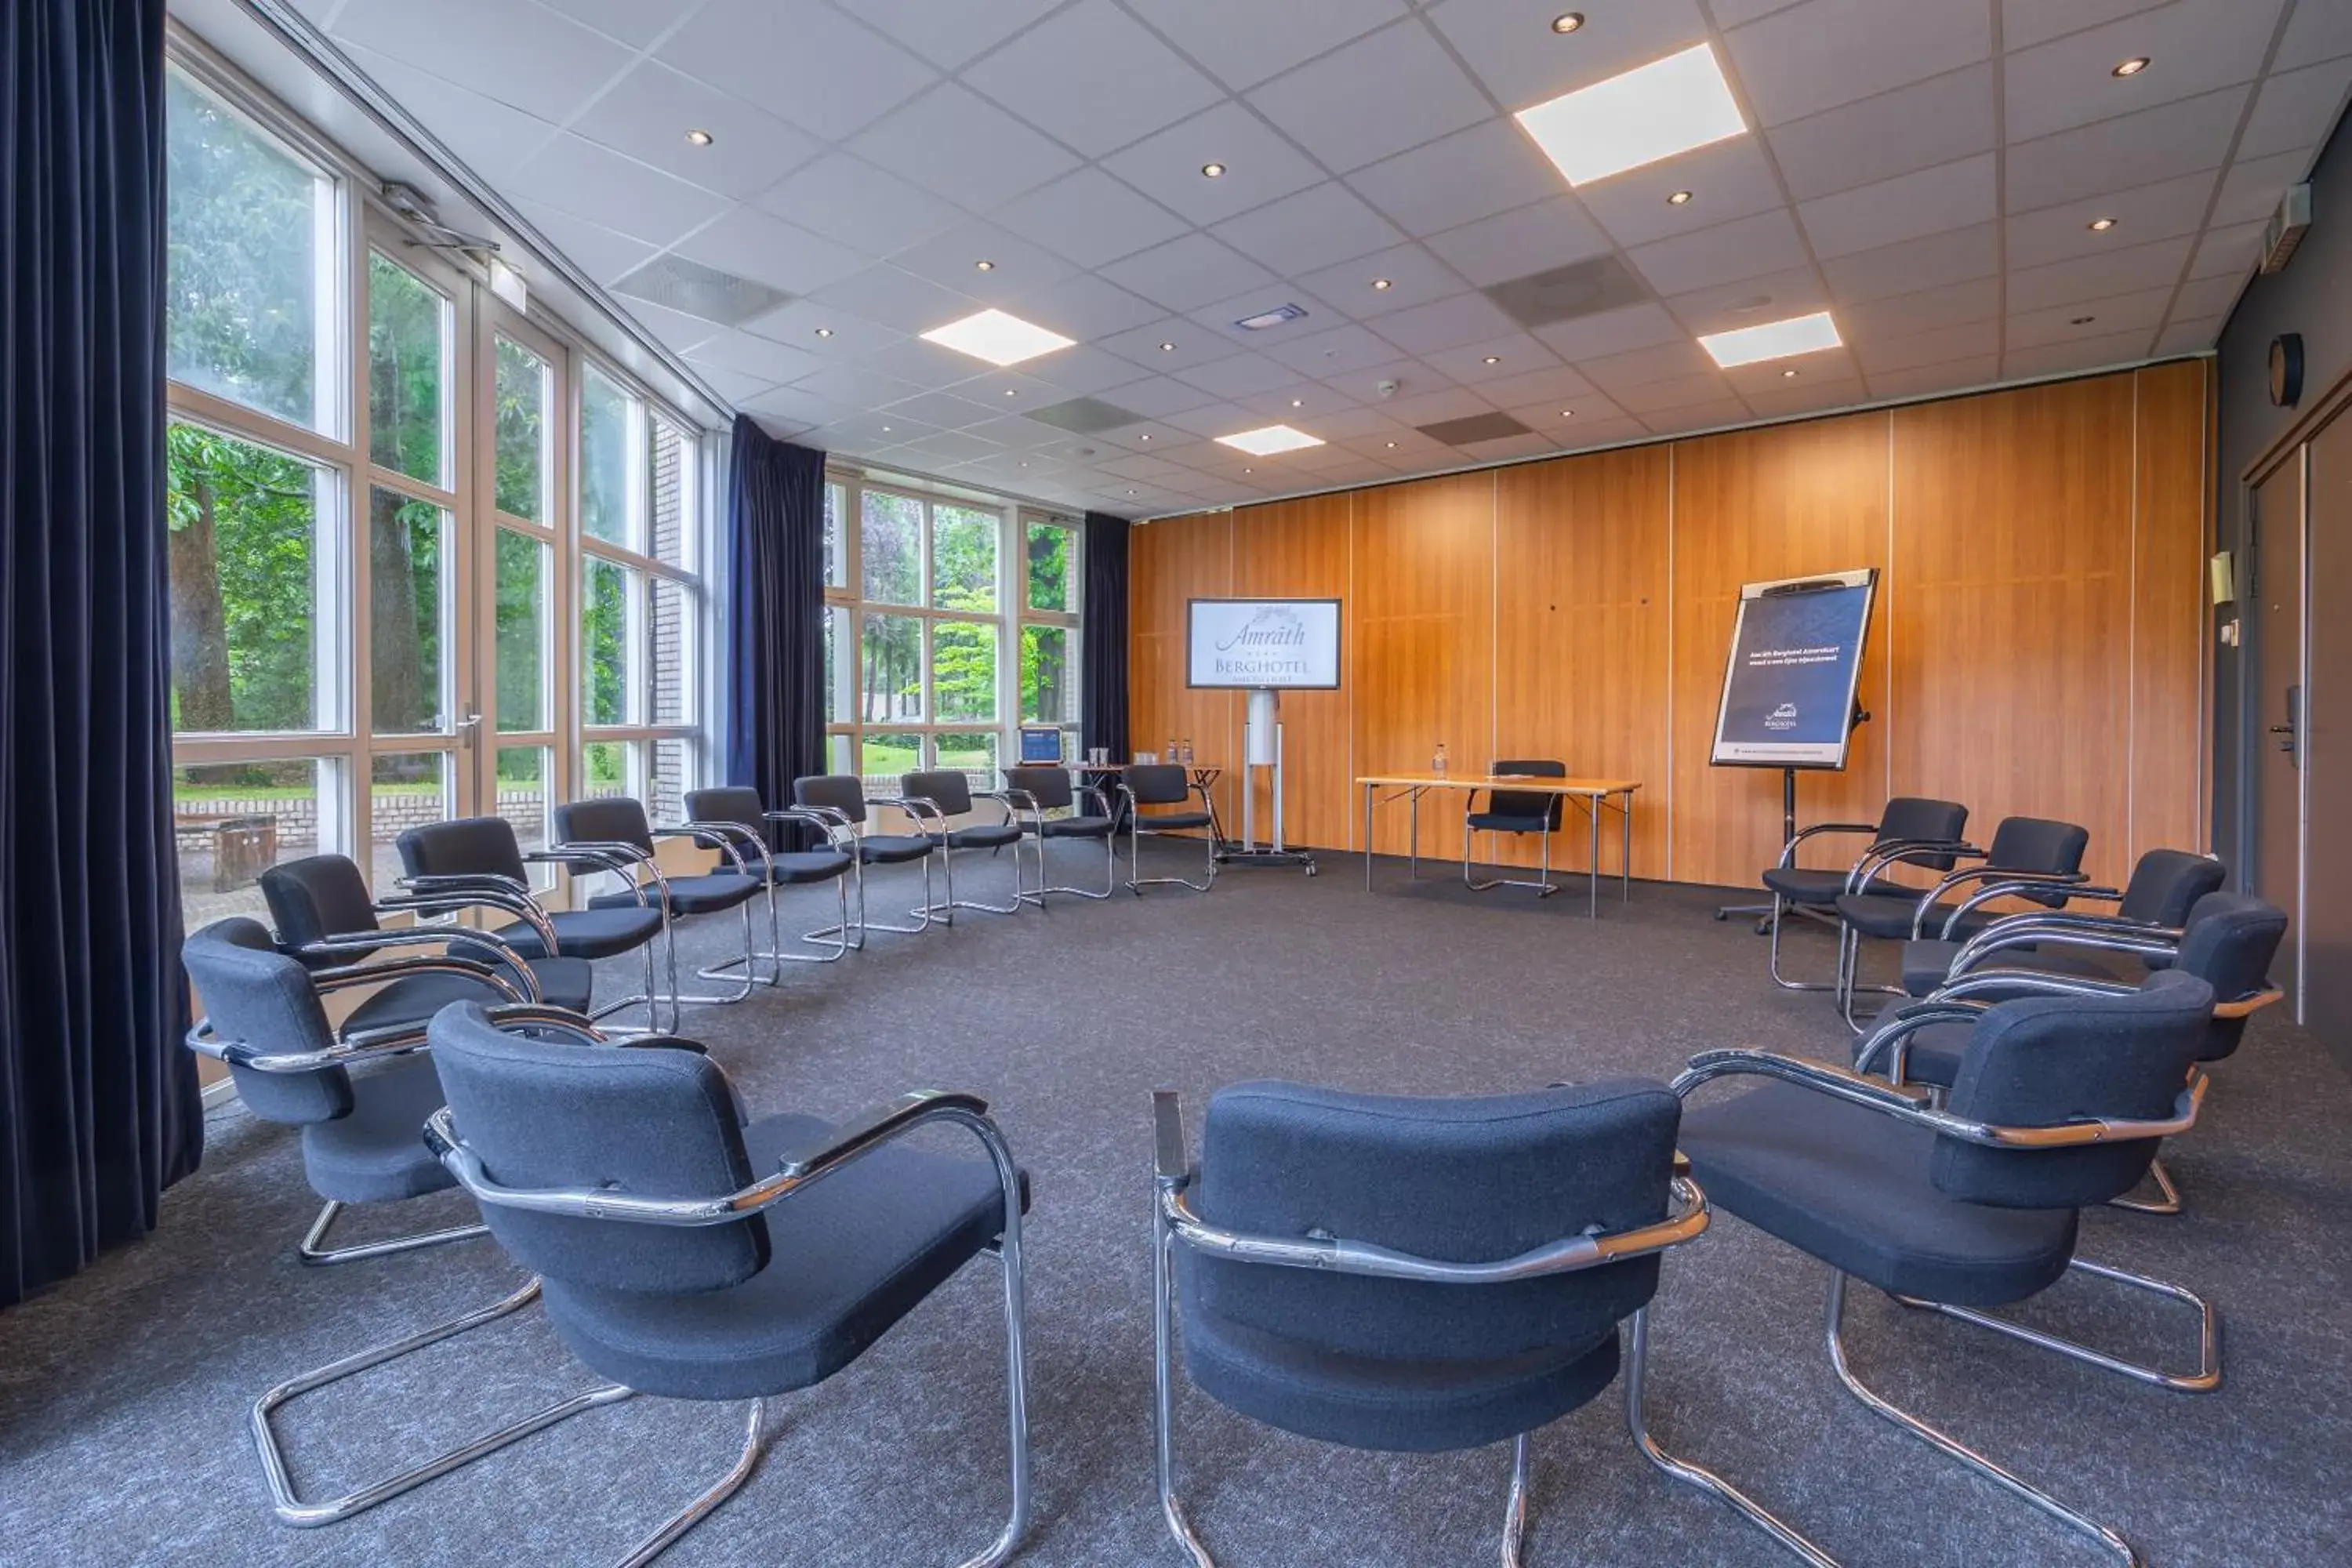 Meeting/conference room in Amrâth Berghotel Amersfoort, BW Signature Collection